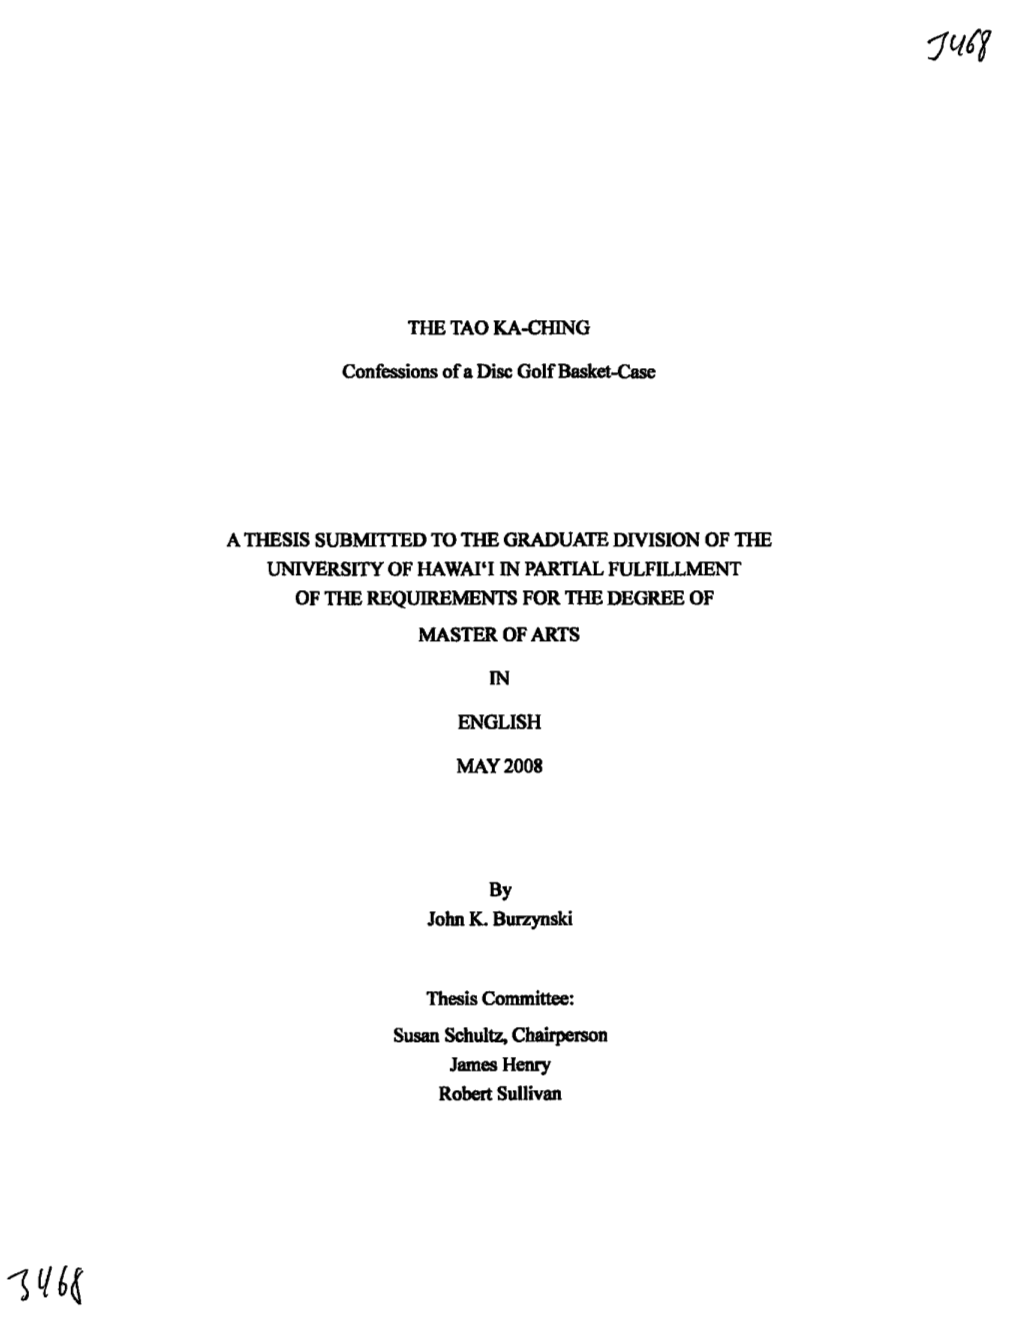 The Tao Ka-Ching a Thesis Submitted to the Graduate